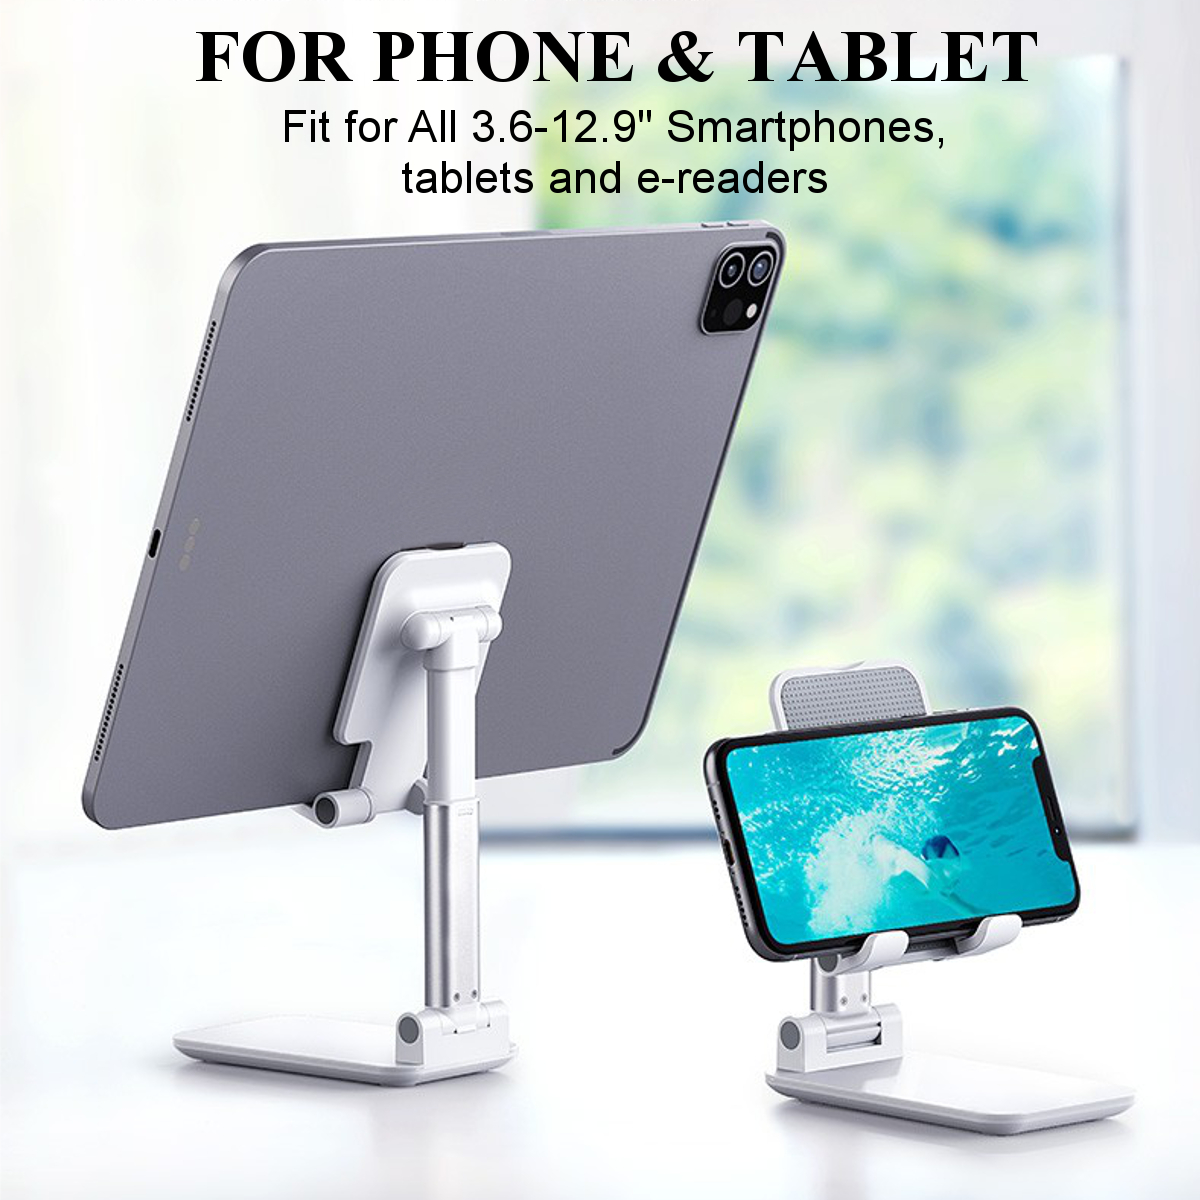 CCT4-Universal-Folding-Telescopic-Desktop-Mobile-Phone-Tablet-Holder-Stand-for-iPad-Air-for-iPhone-1-1811828-2